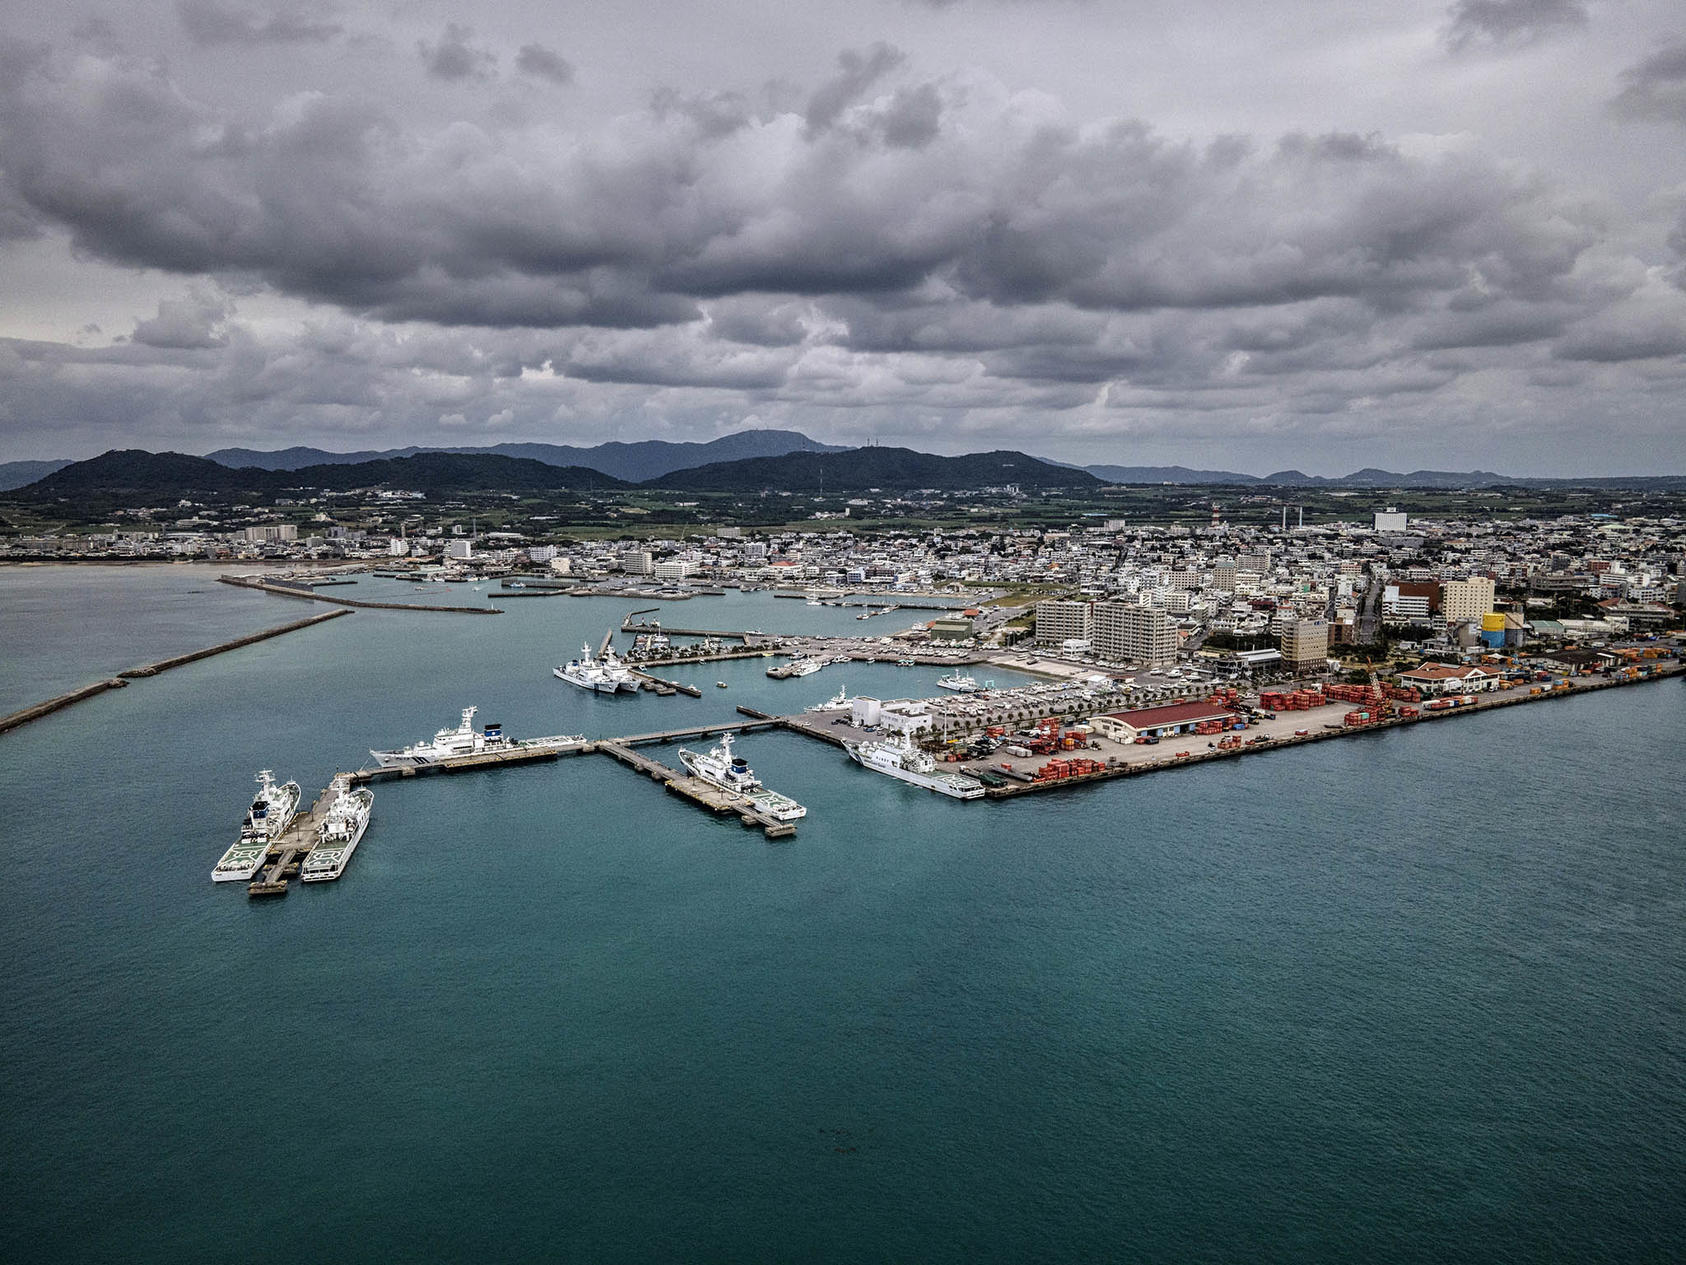 Japan Coast Guard patrol ships docked in the harbor on Ishigaki, Nov. 4, 2021. The island is home to Japan’s largest Coast Guard office, which devotes significant resources to patrolling the Senkaku Islands. (The New York Times)